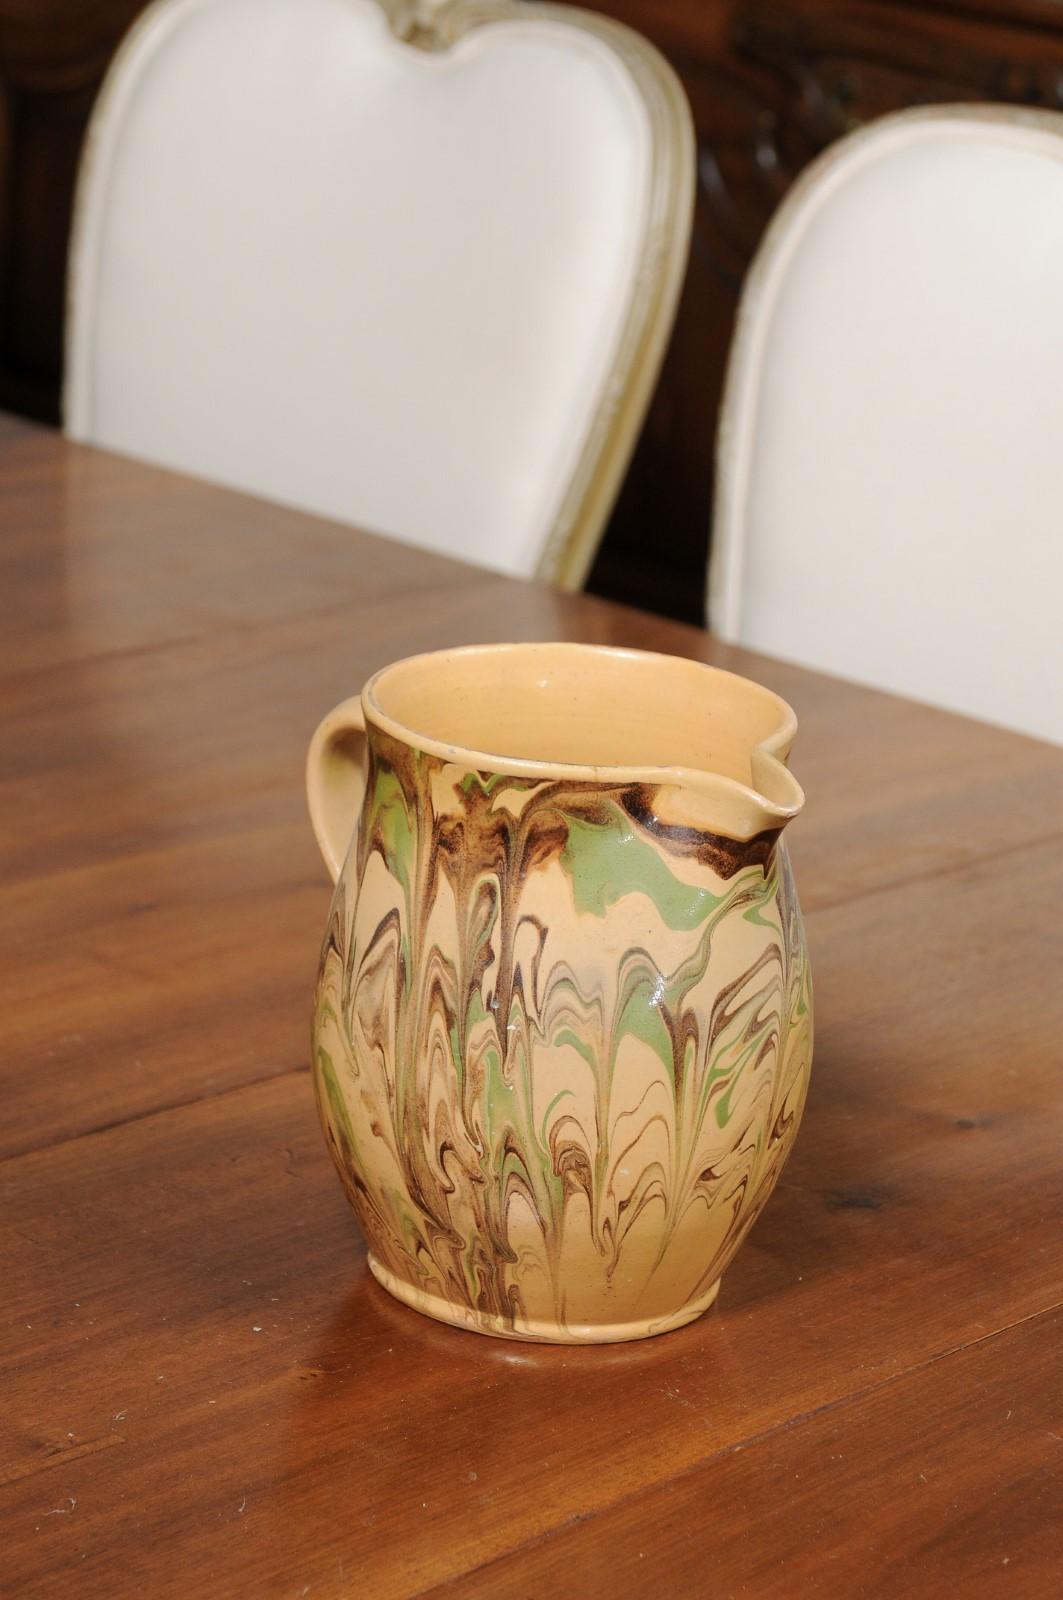 A French pottery pitcher from the 19th century, with green and brown marble style design. Created in France during the 19th century, this pottery pitcher features a yellow ground accented with a lovely dripping décor and green and brown tones